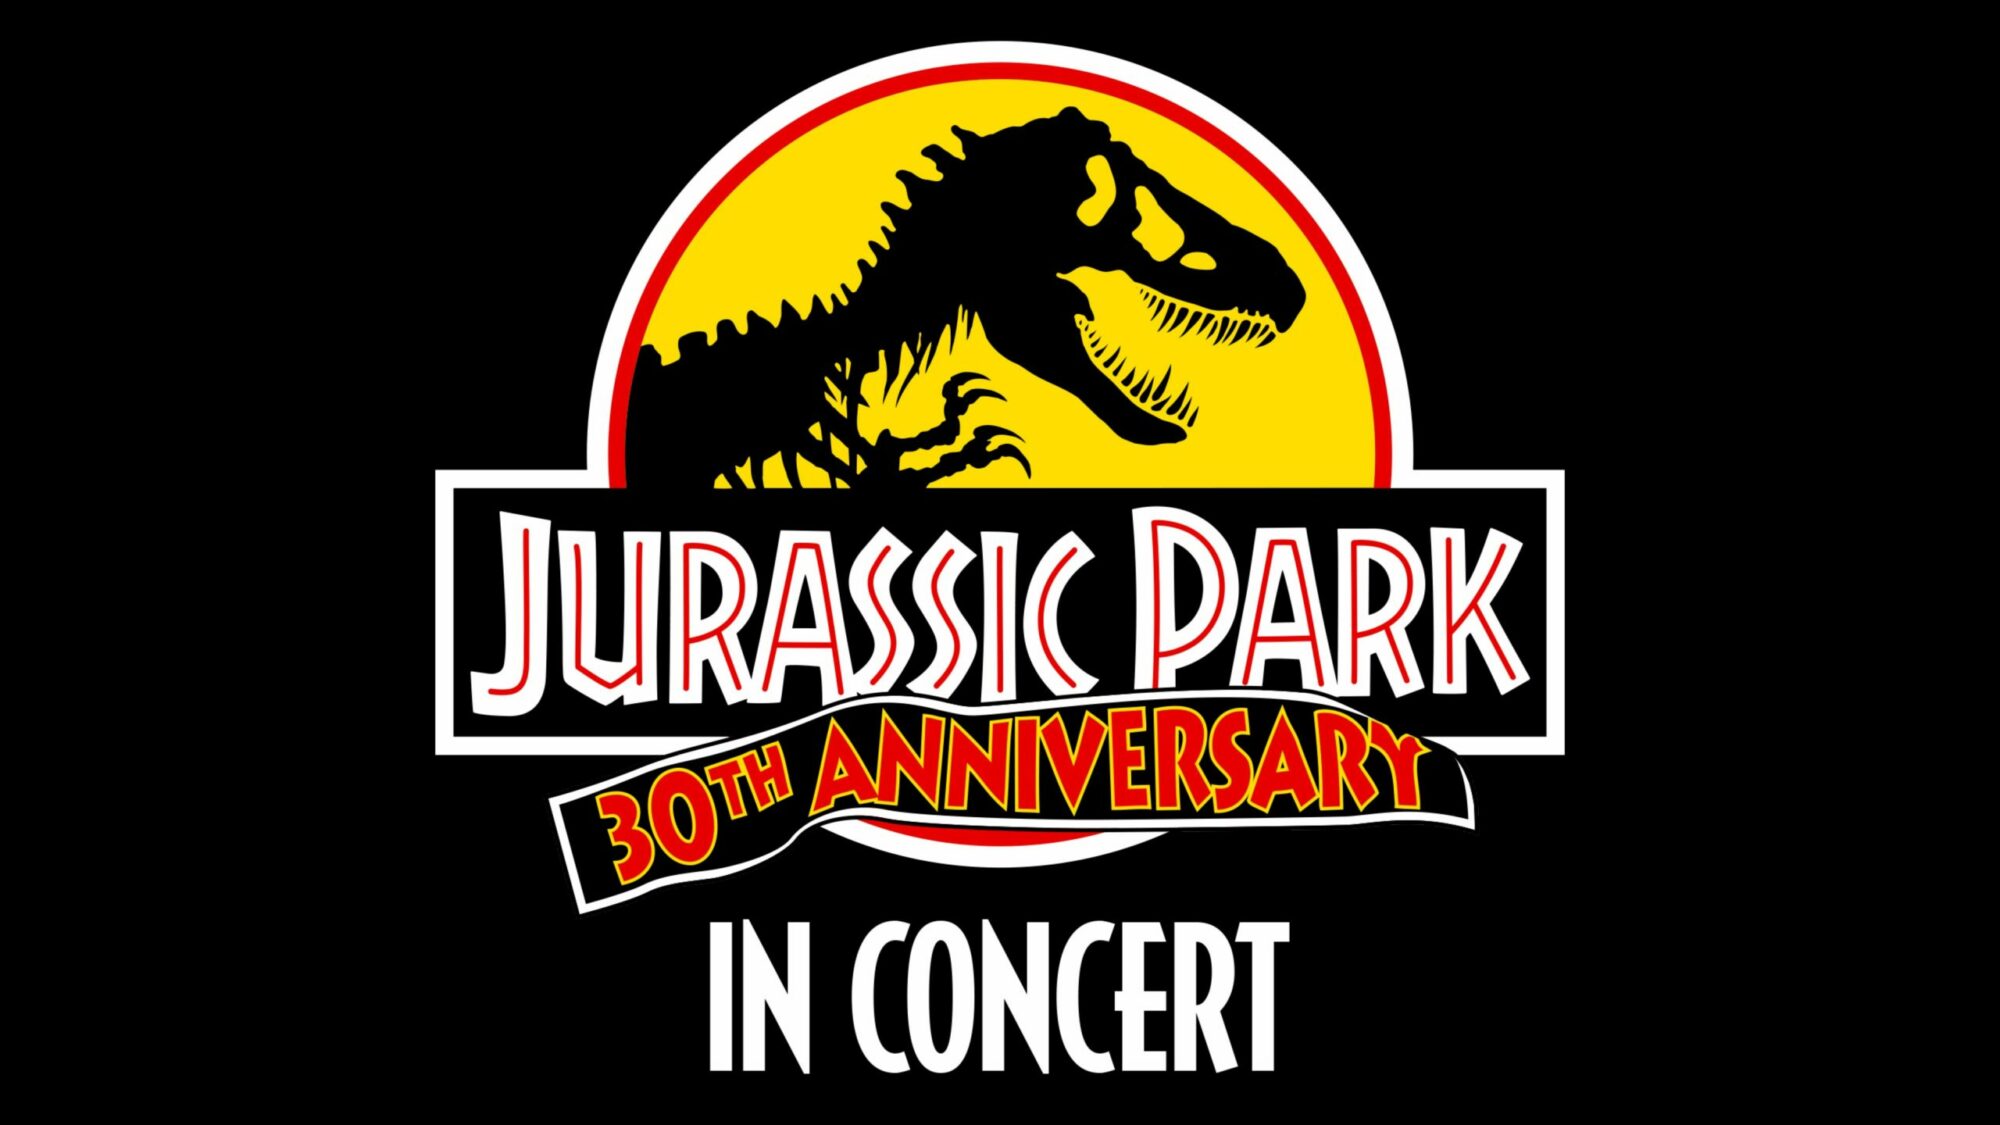 Image name Jurassic Park in Concert Premium Package The Luxury Experience at First Direct Arena Leeds scaled the 36 image from the post Jurassic Park In Concert - 30th Anniversary at First Direct Arena, Leeds in Yorkshire.com.